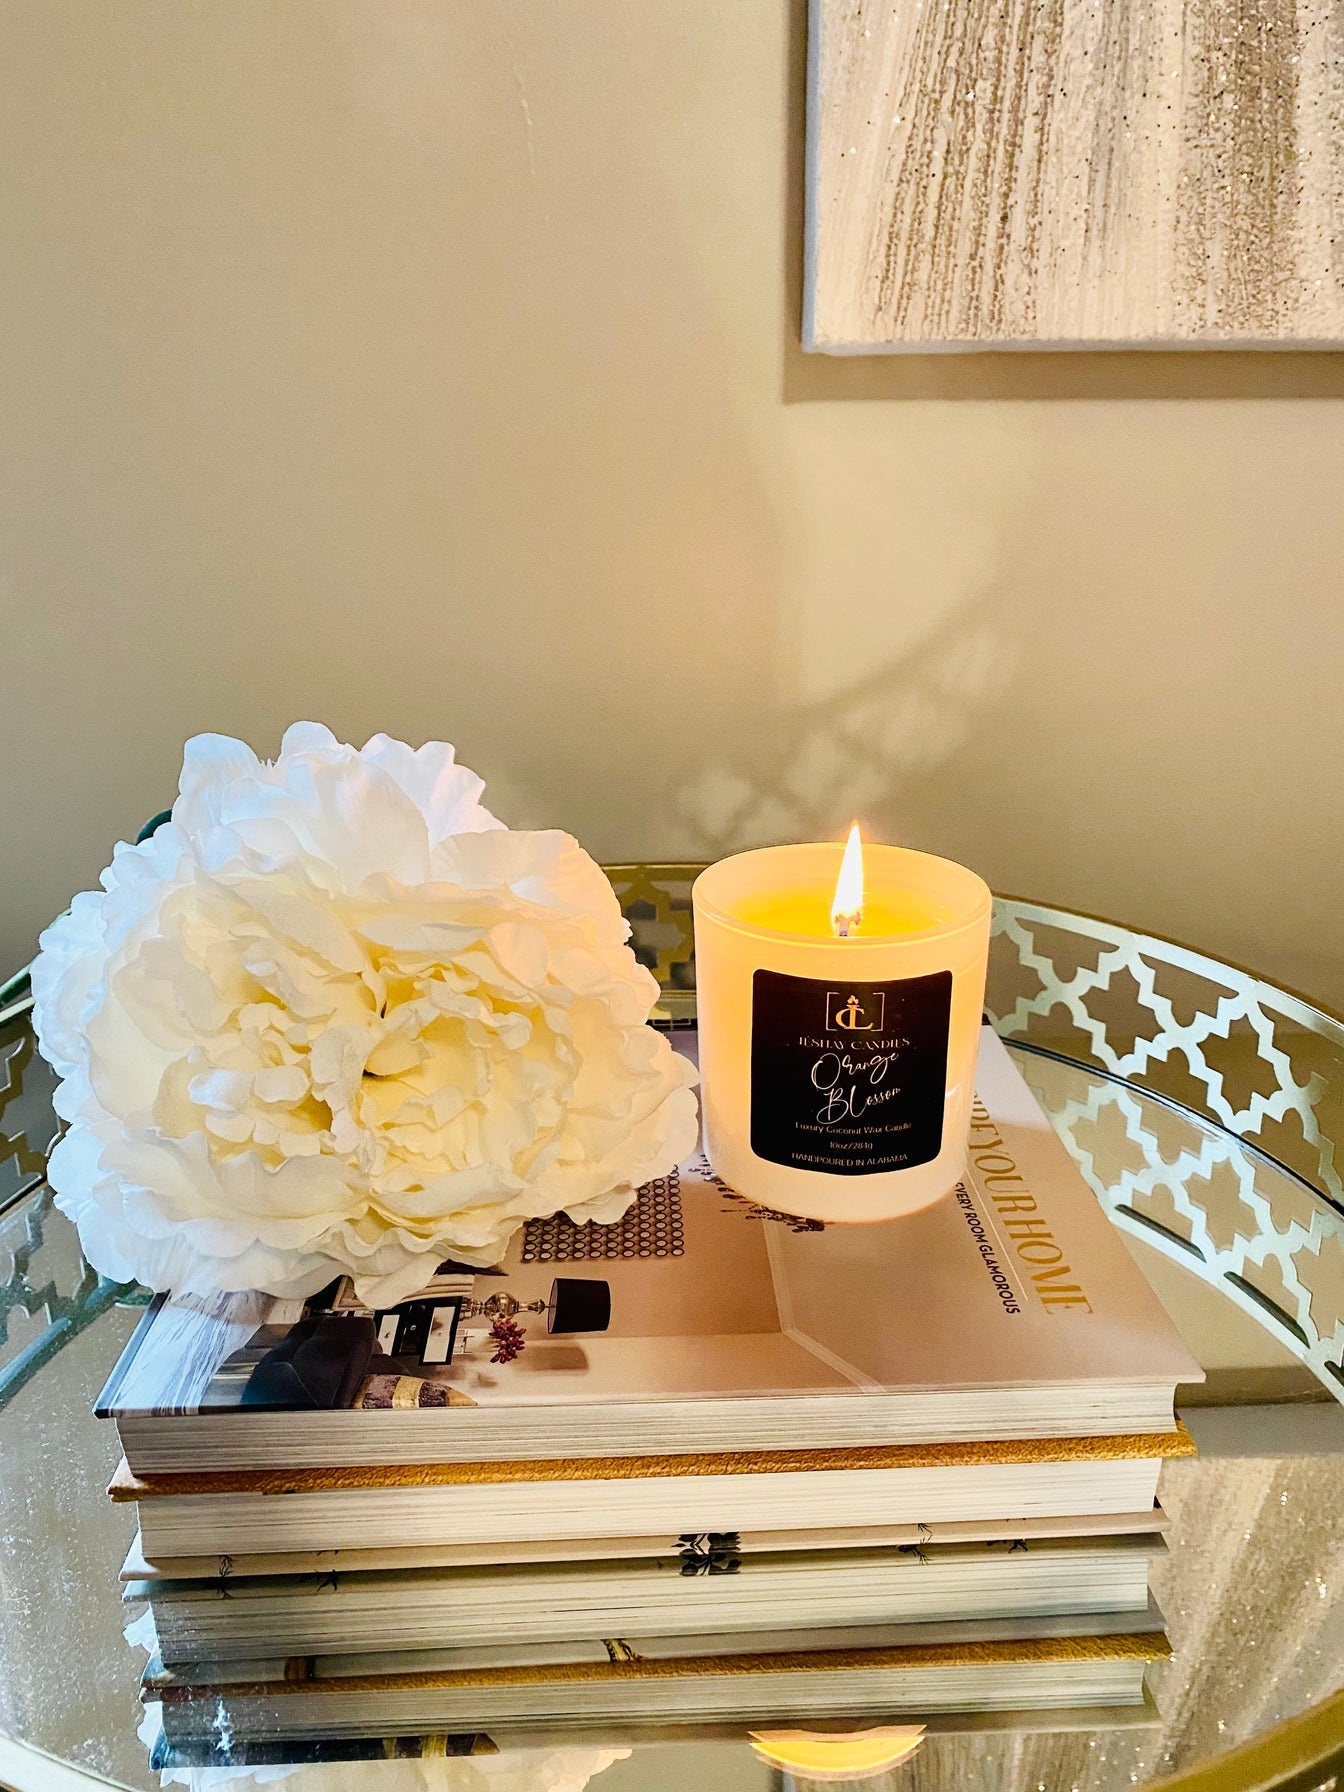 “ORANGE BLOSSOM” WHITE JAR LUXE CANDLE